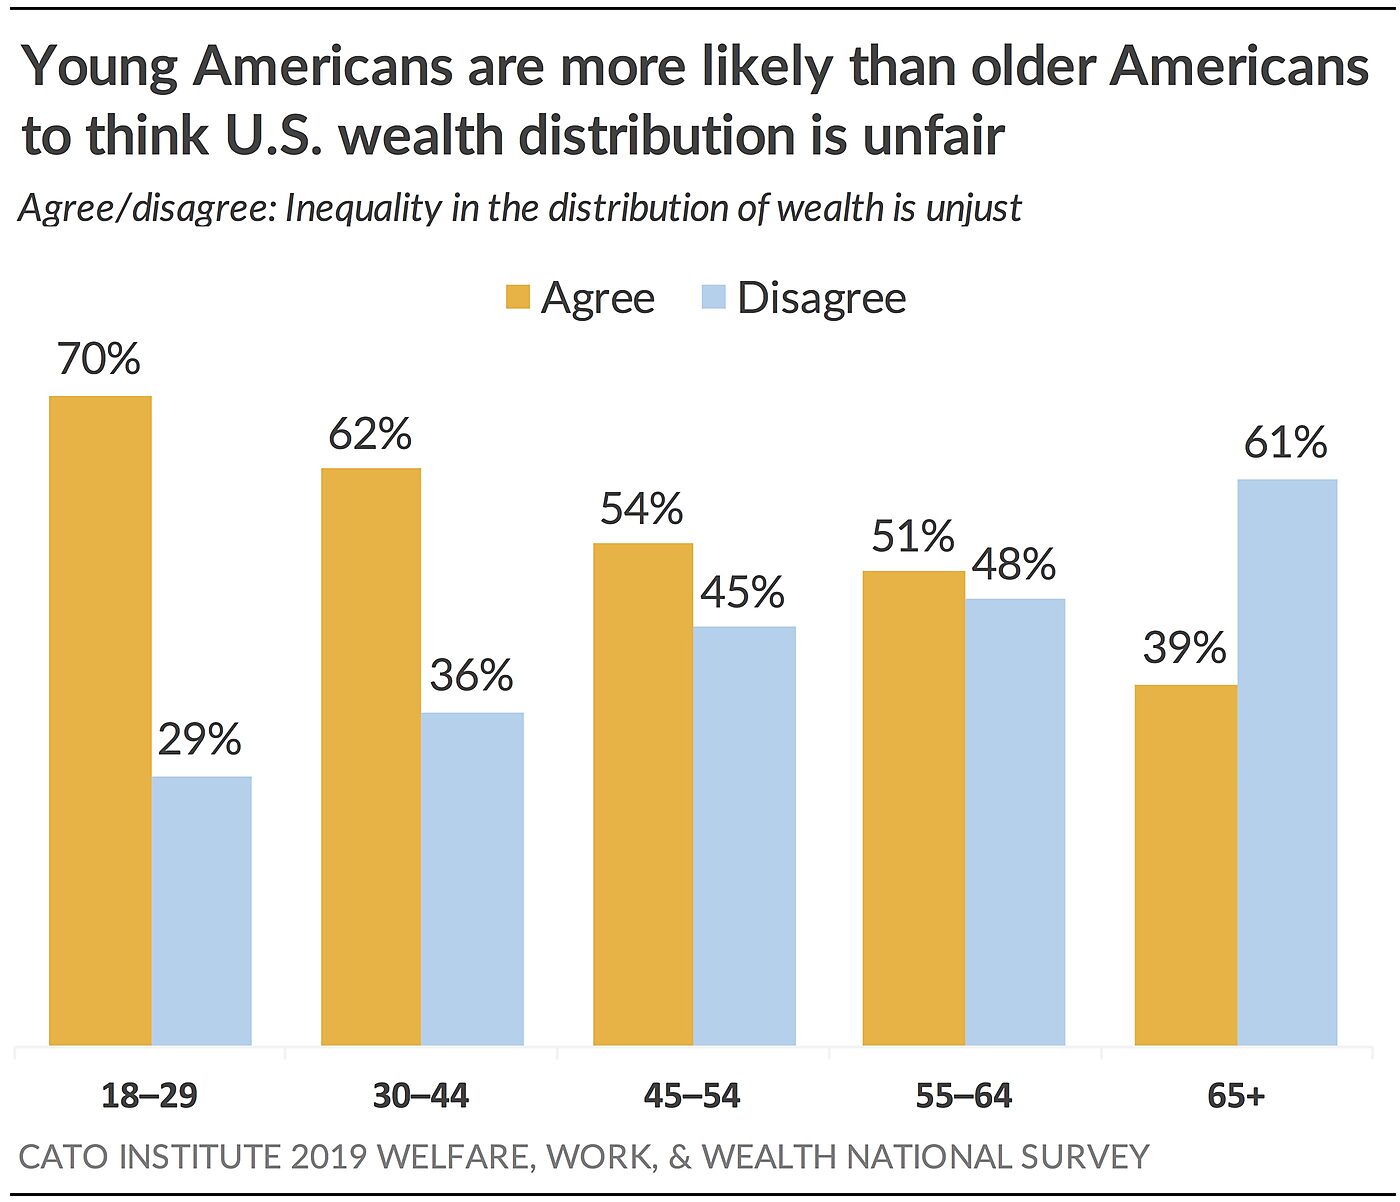 Young Americans are more likely than older Americans to think U.S. wealth distribution is unfair